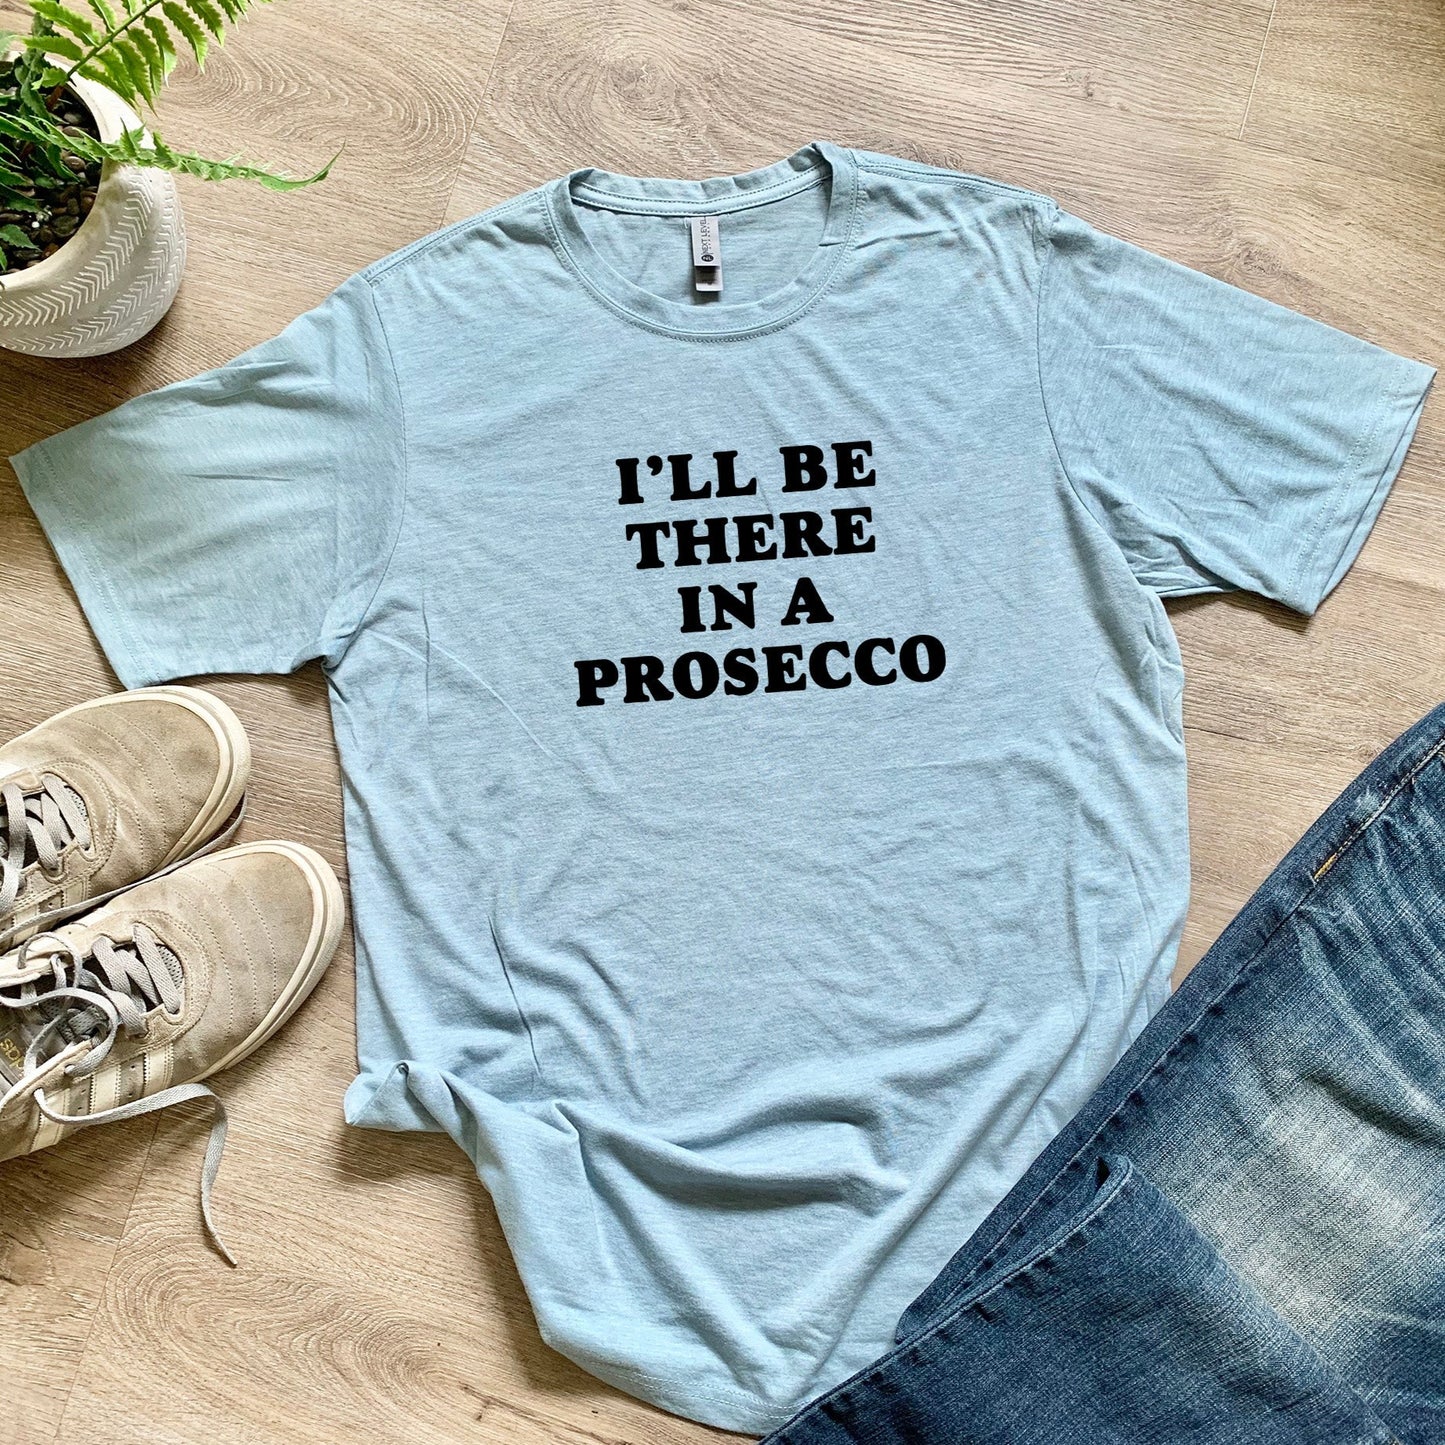 I'll Be There In a Prosecco - Bold Type - Men's / Unisex Tee - Stonewash Blue or Sage